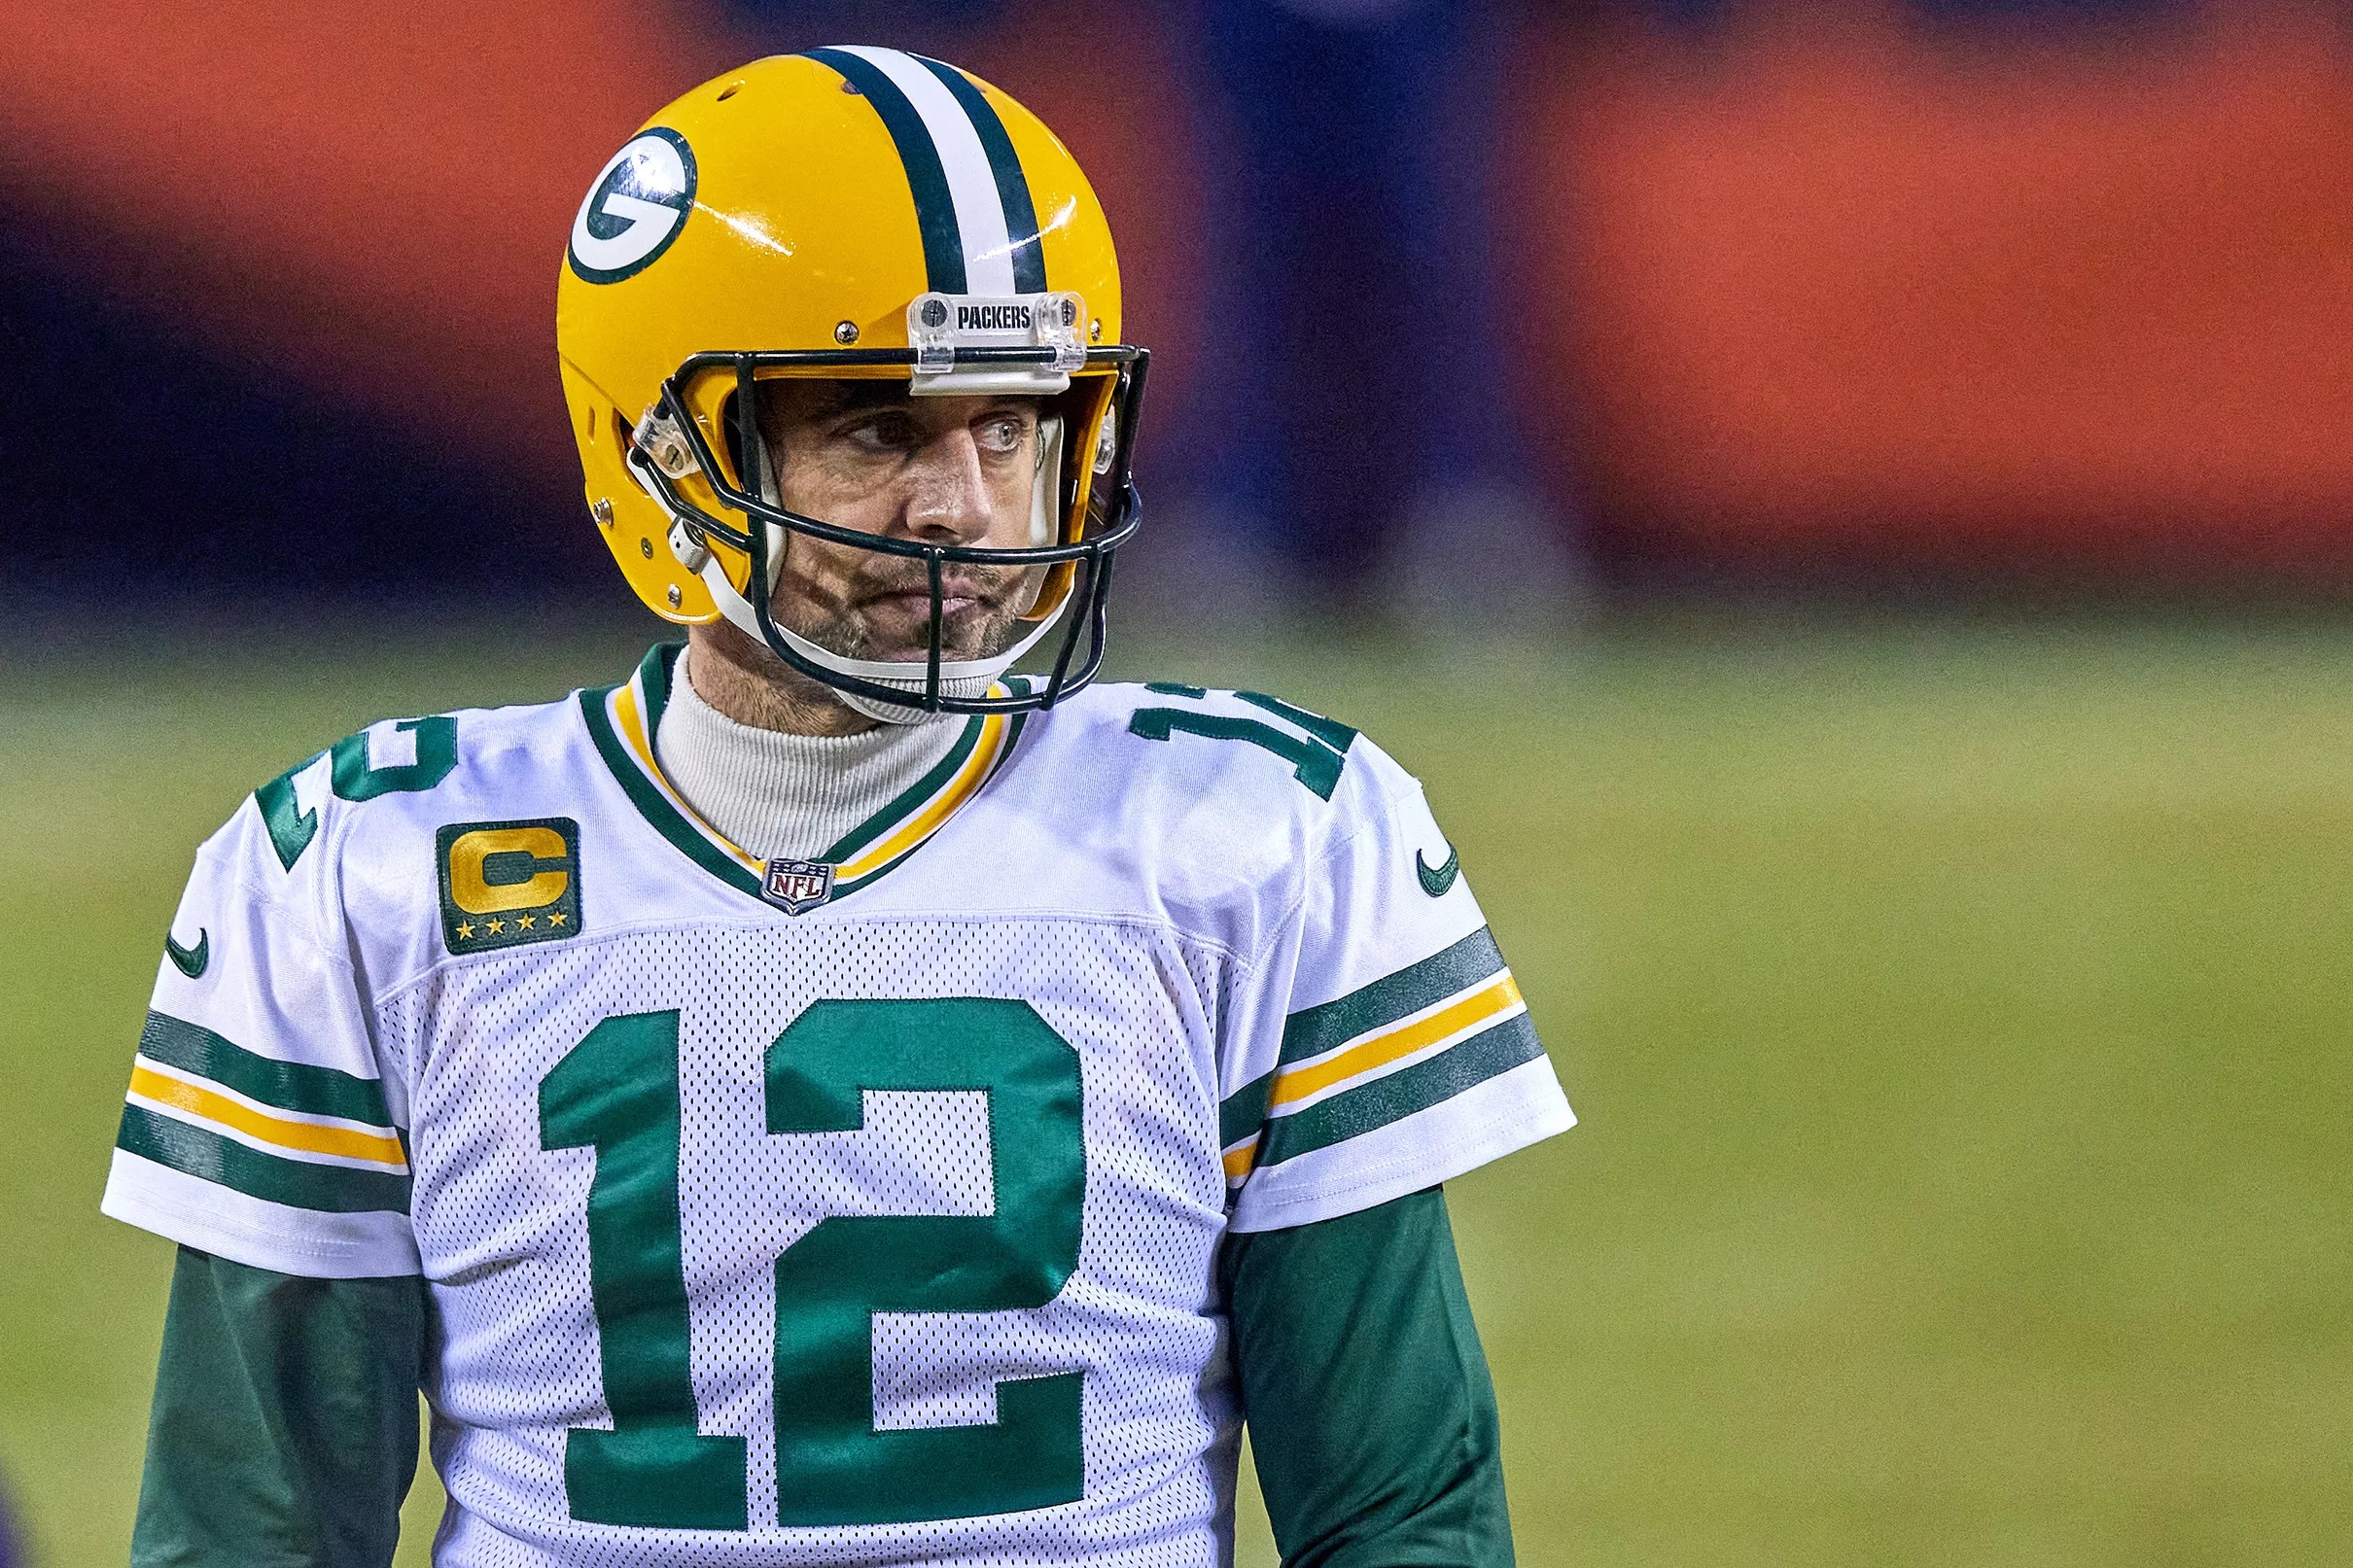 Explaining the salary cap ramifications of a potential Aaron Rodgers trade